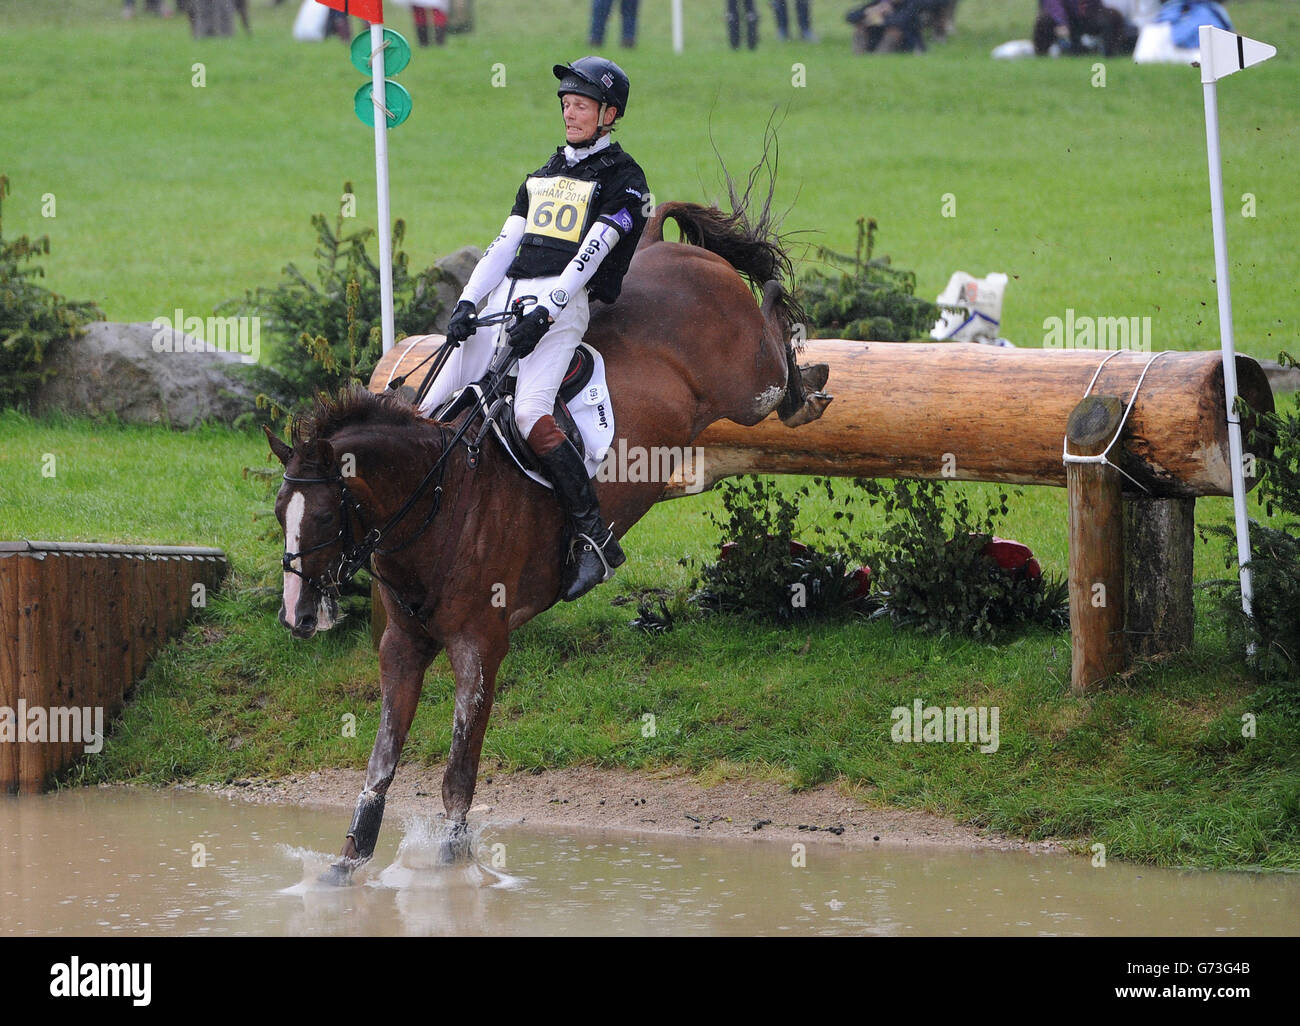 William Fox-Pitt riding Chilli Morning competes in the CIC3* cross country event during the Bramham International Horse Trials at Bramham Park, West Yorkshire. Stock Photo